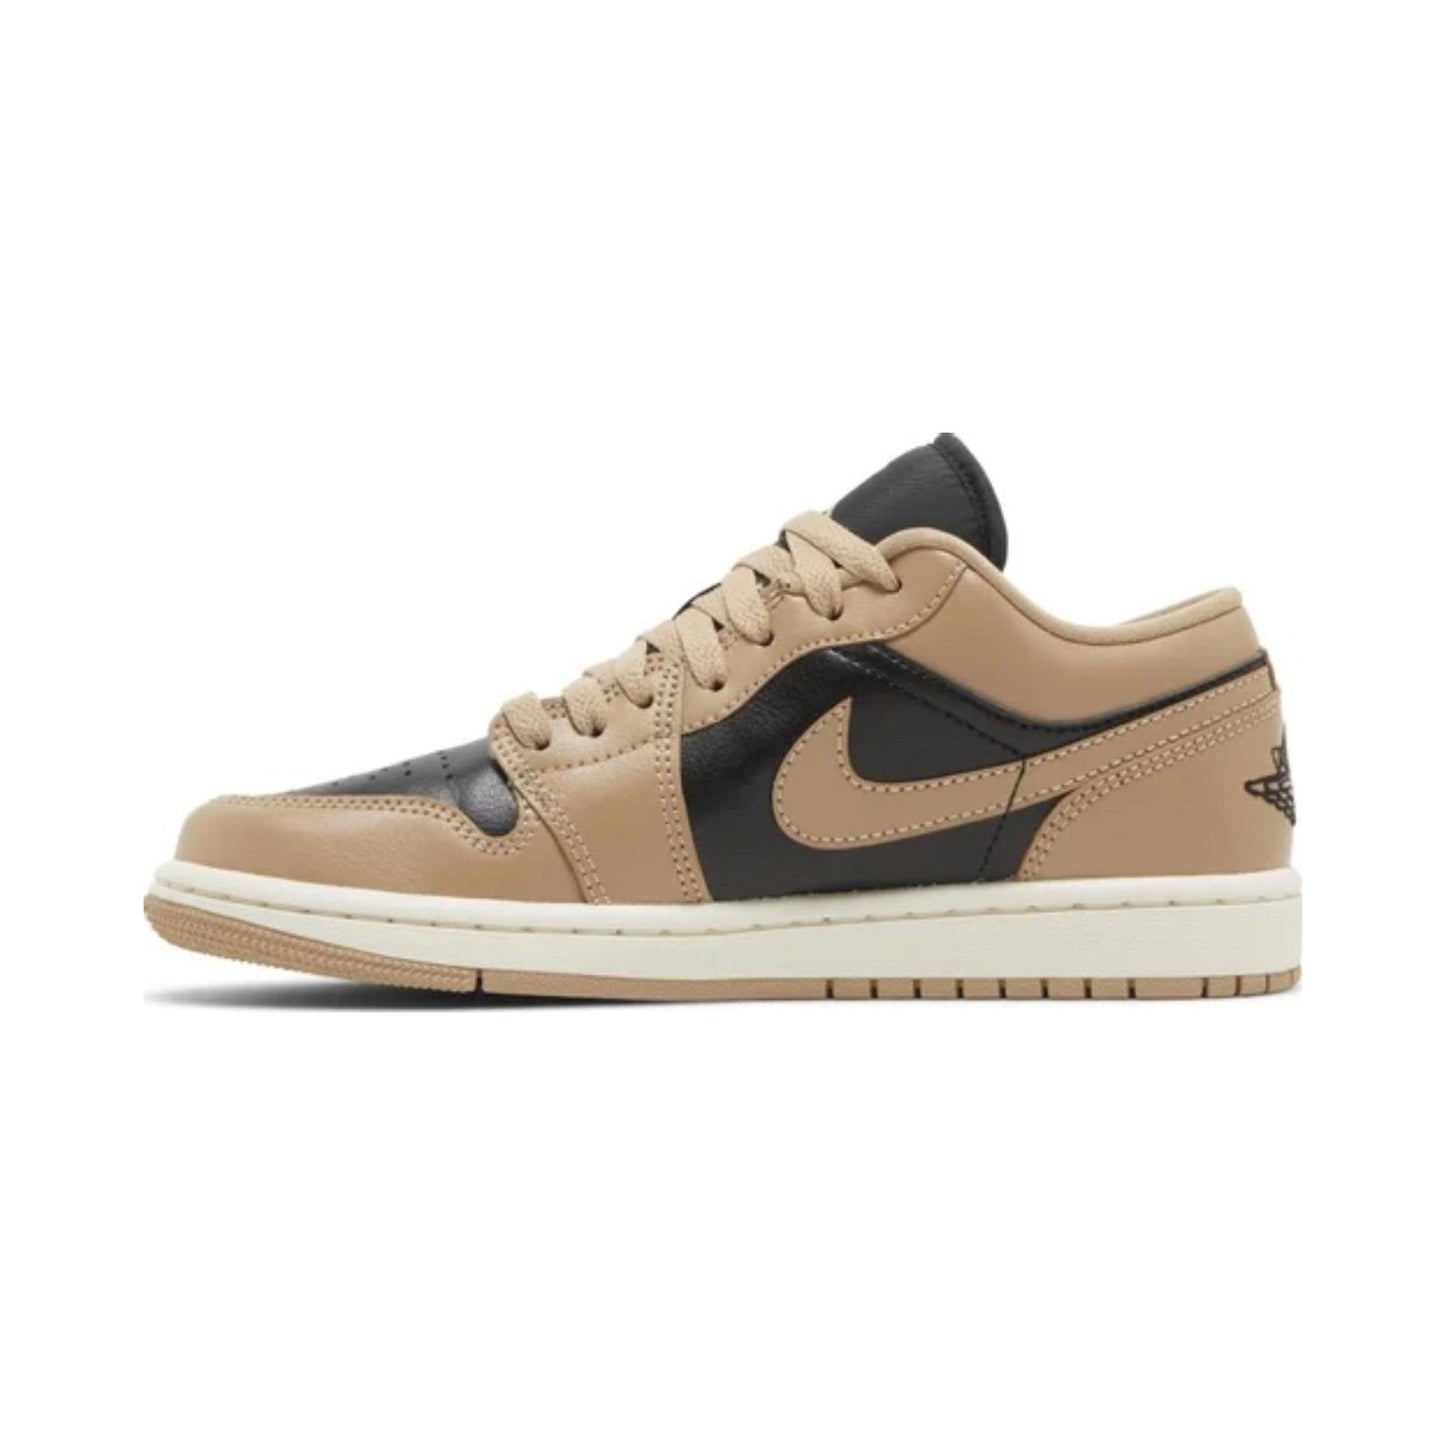 Women's Air With the Nike Air we get a very popular colourway on the comfortable CMFT Jordan, Desert